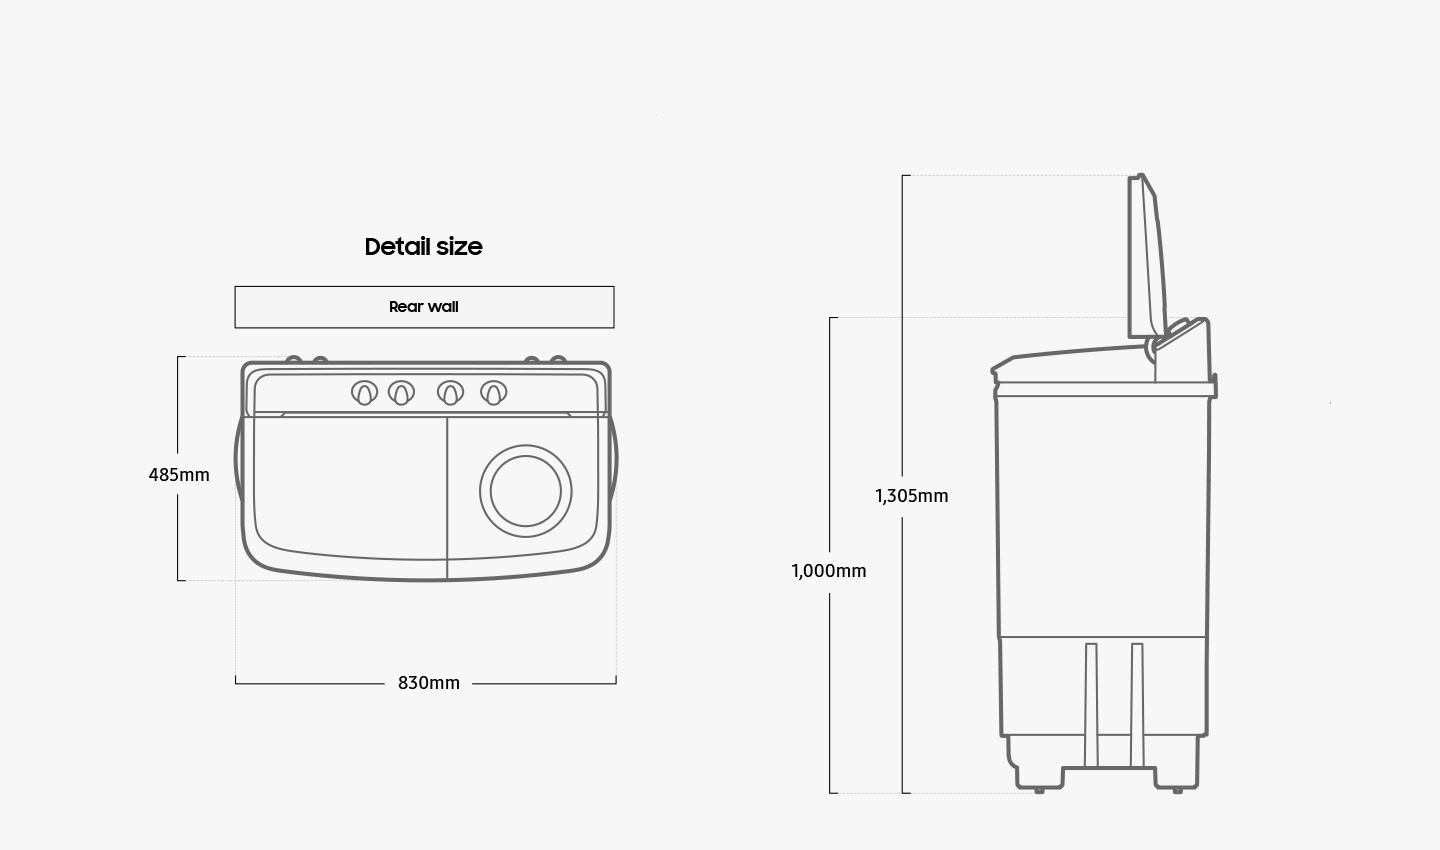 The Washer is 830mm wide, 485mm deep, and 1,000mm tall. The height with door opened to 90 degrees is 1,305mm.